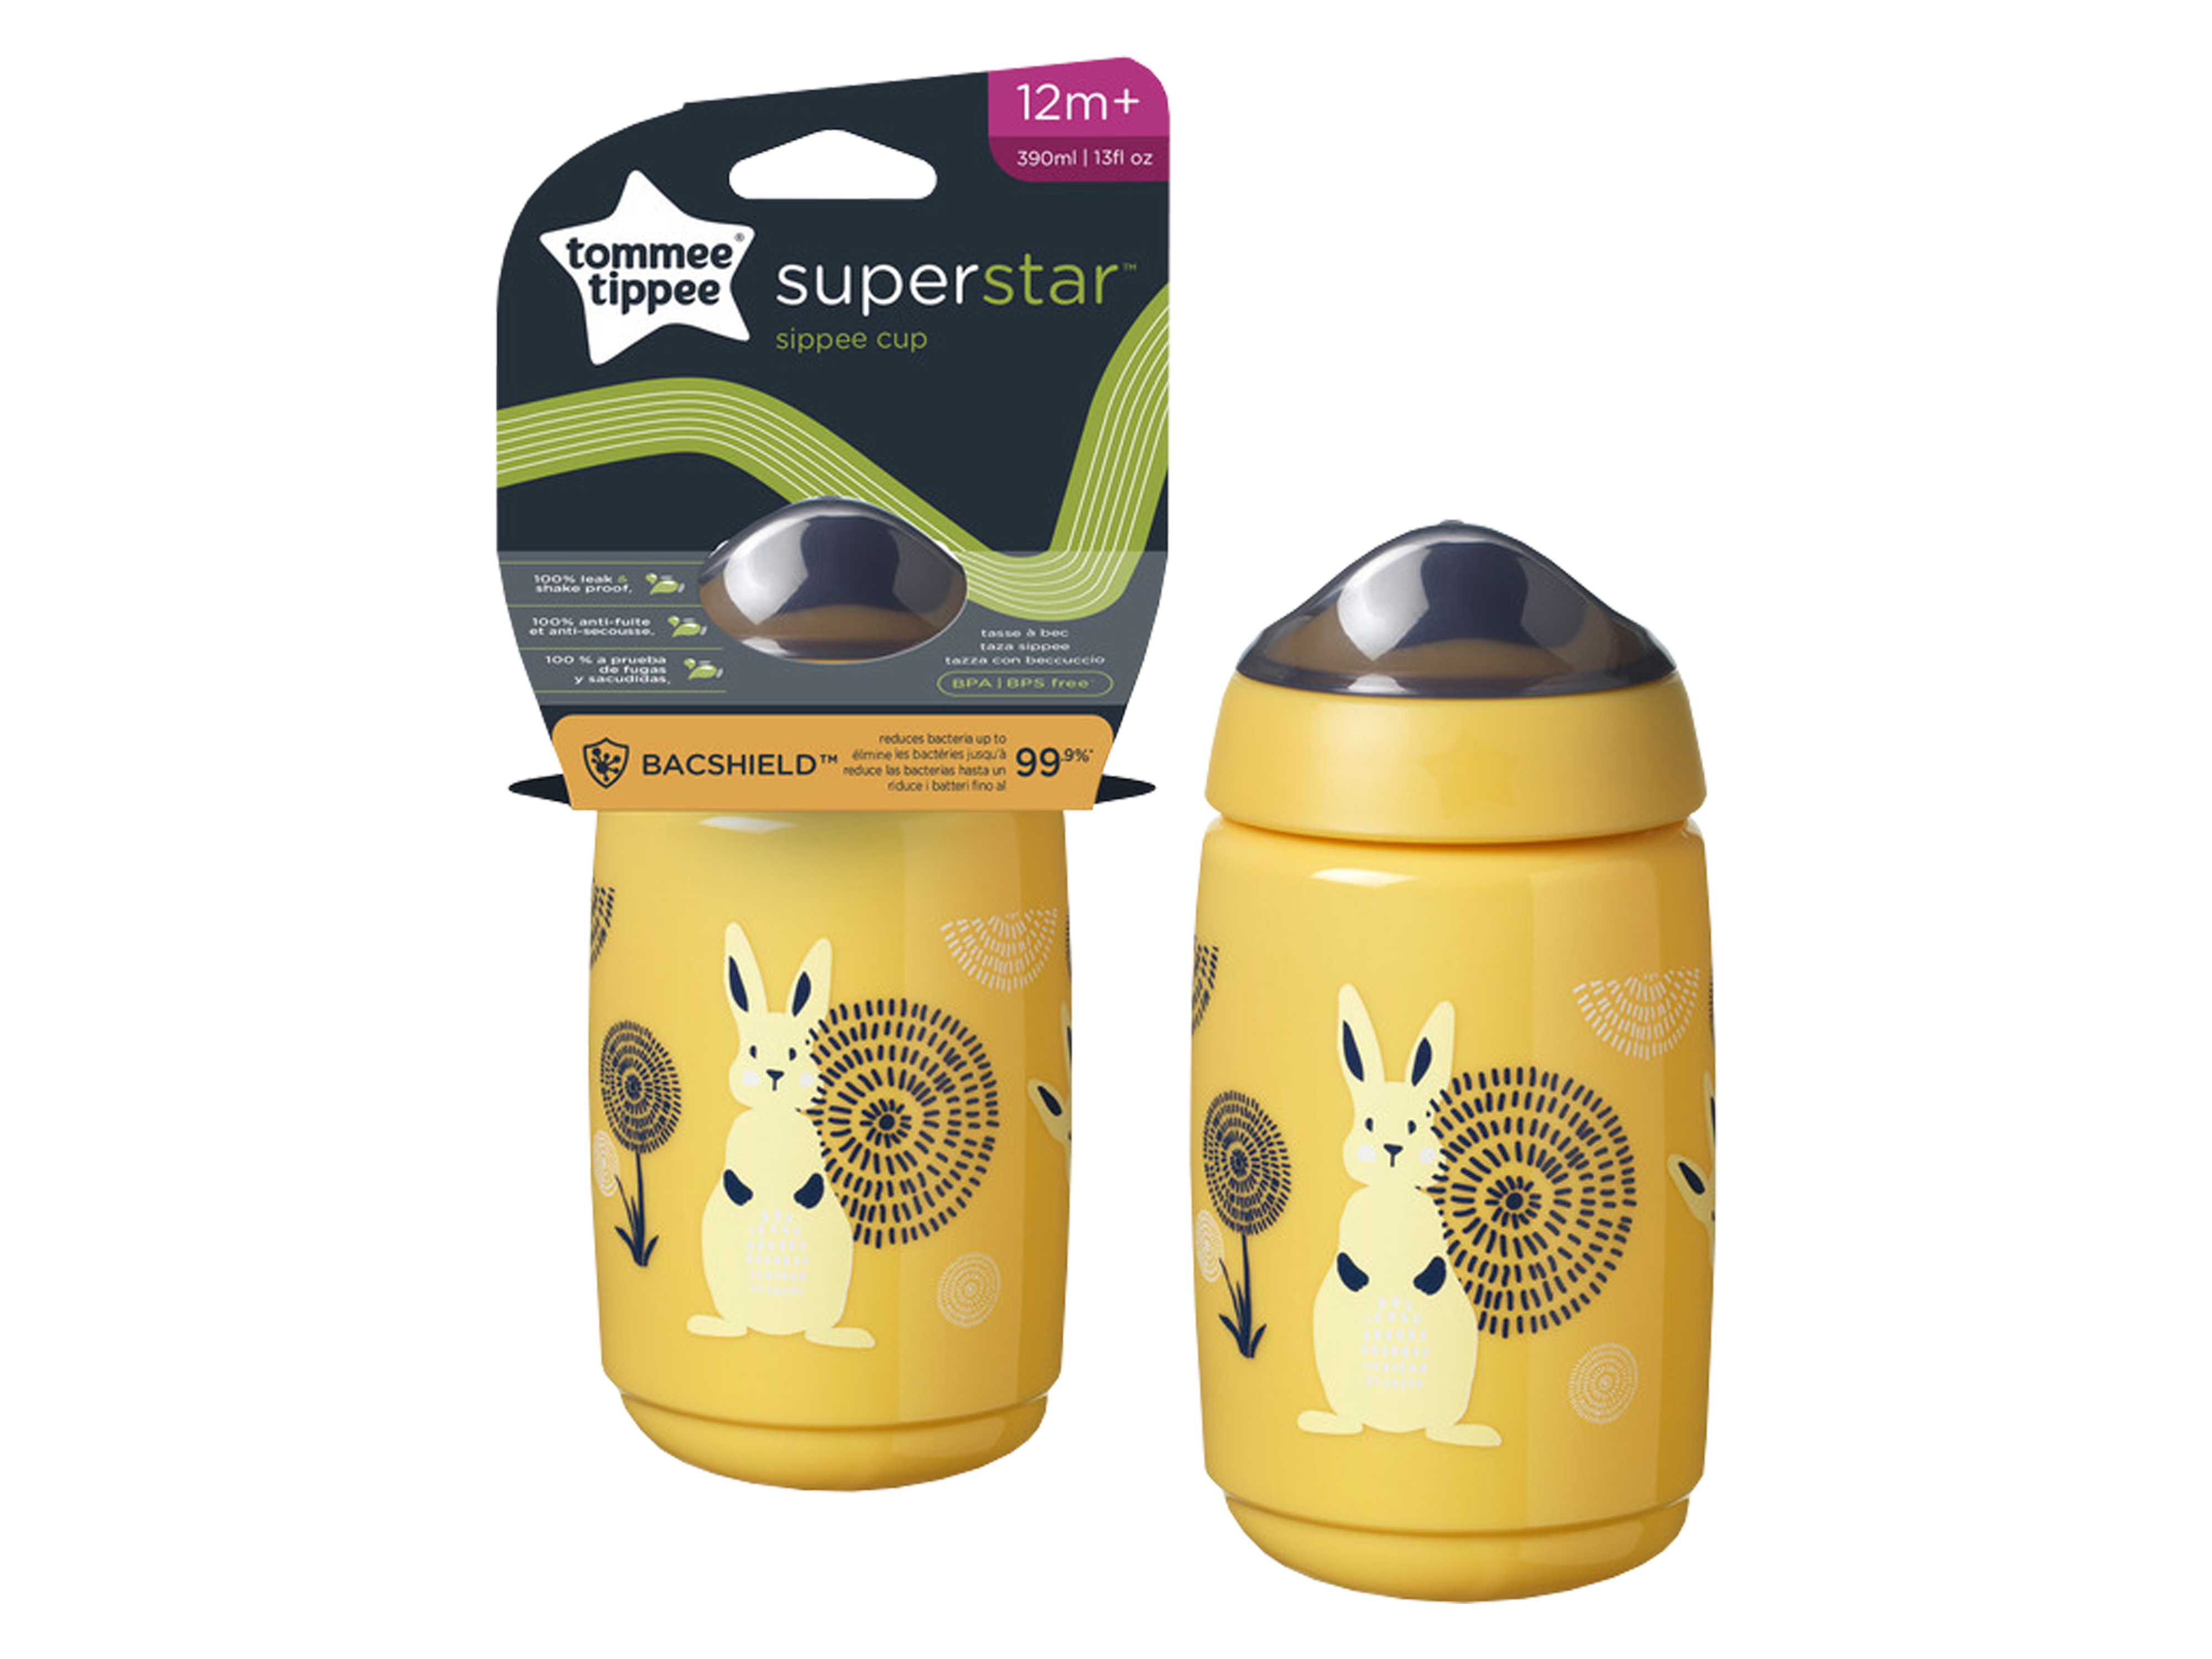 Tommee Tippee Superstar Sippee Cup 12md+, gul, 1 stk.